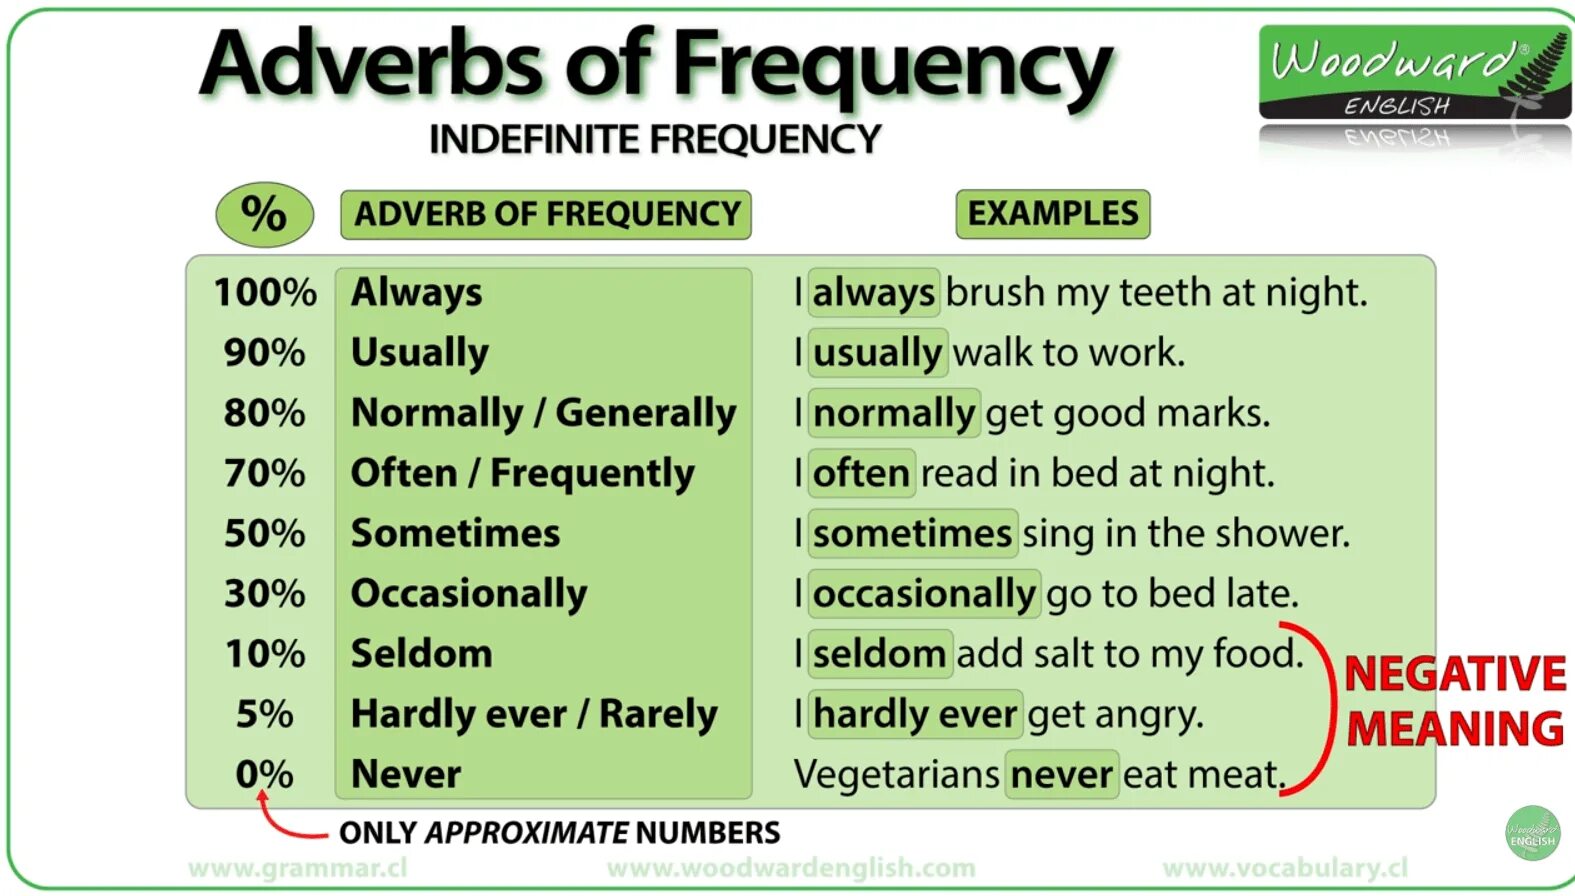 Present simple adverbs. Adverbs of Frequency. Adverbs of Frequency in English. Adverbs and expressions of Frequency правило. Frequency adverbs грамматика.